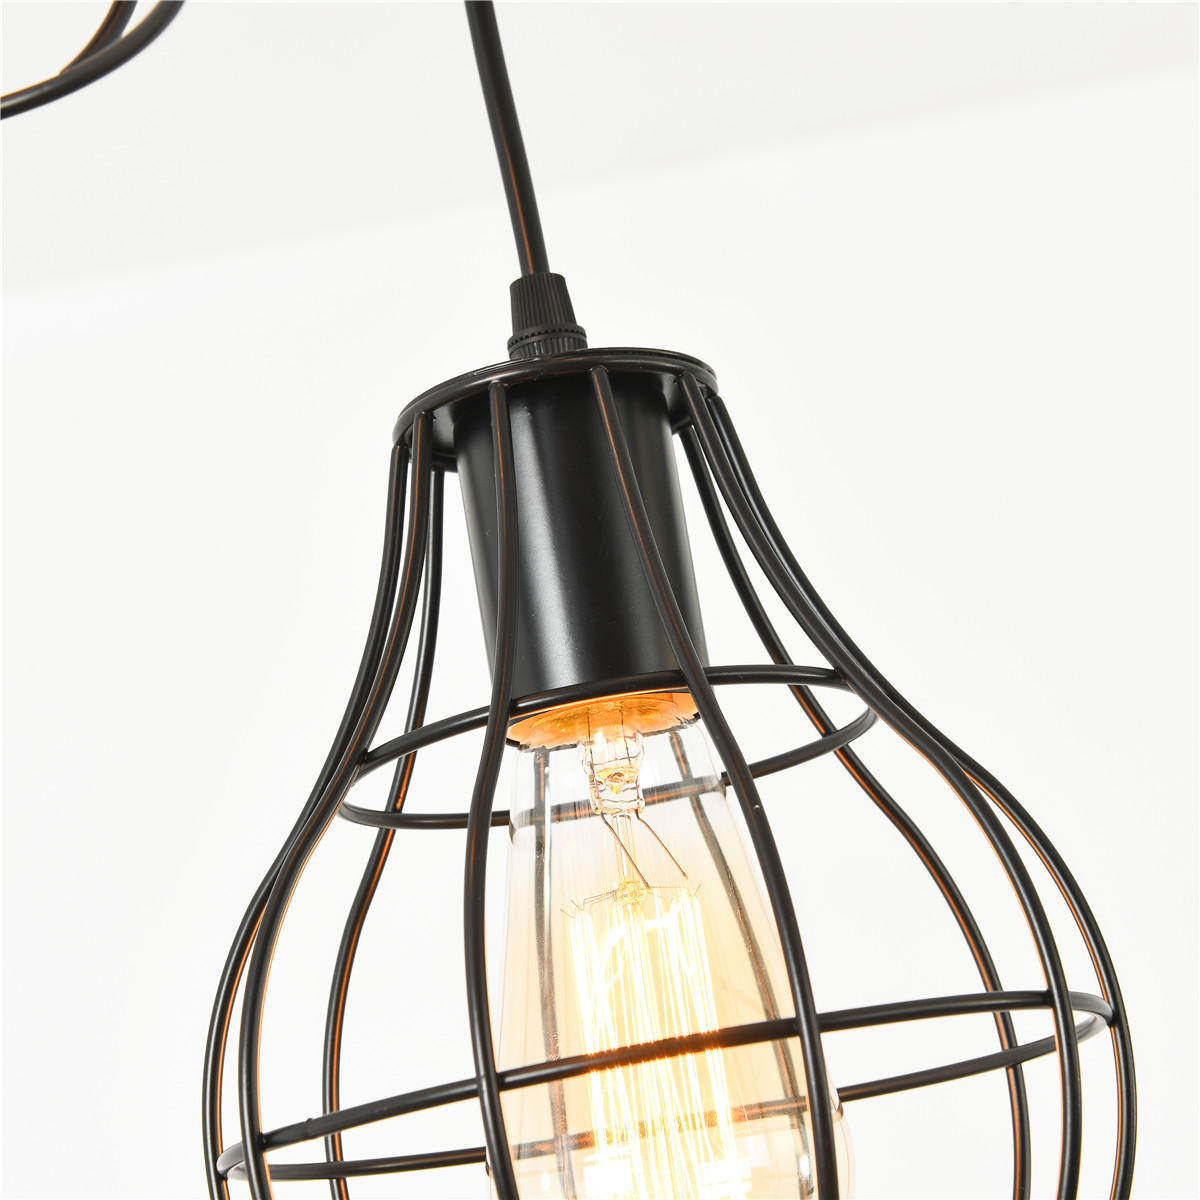 3-Lights-Industrial-Pendant-Lighting-Ceiling-Metal-Vintage-Hanging-Retro-Lamp-Without-Bulb-1710143-9